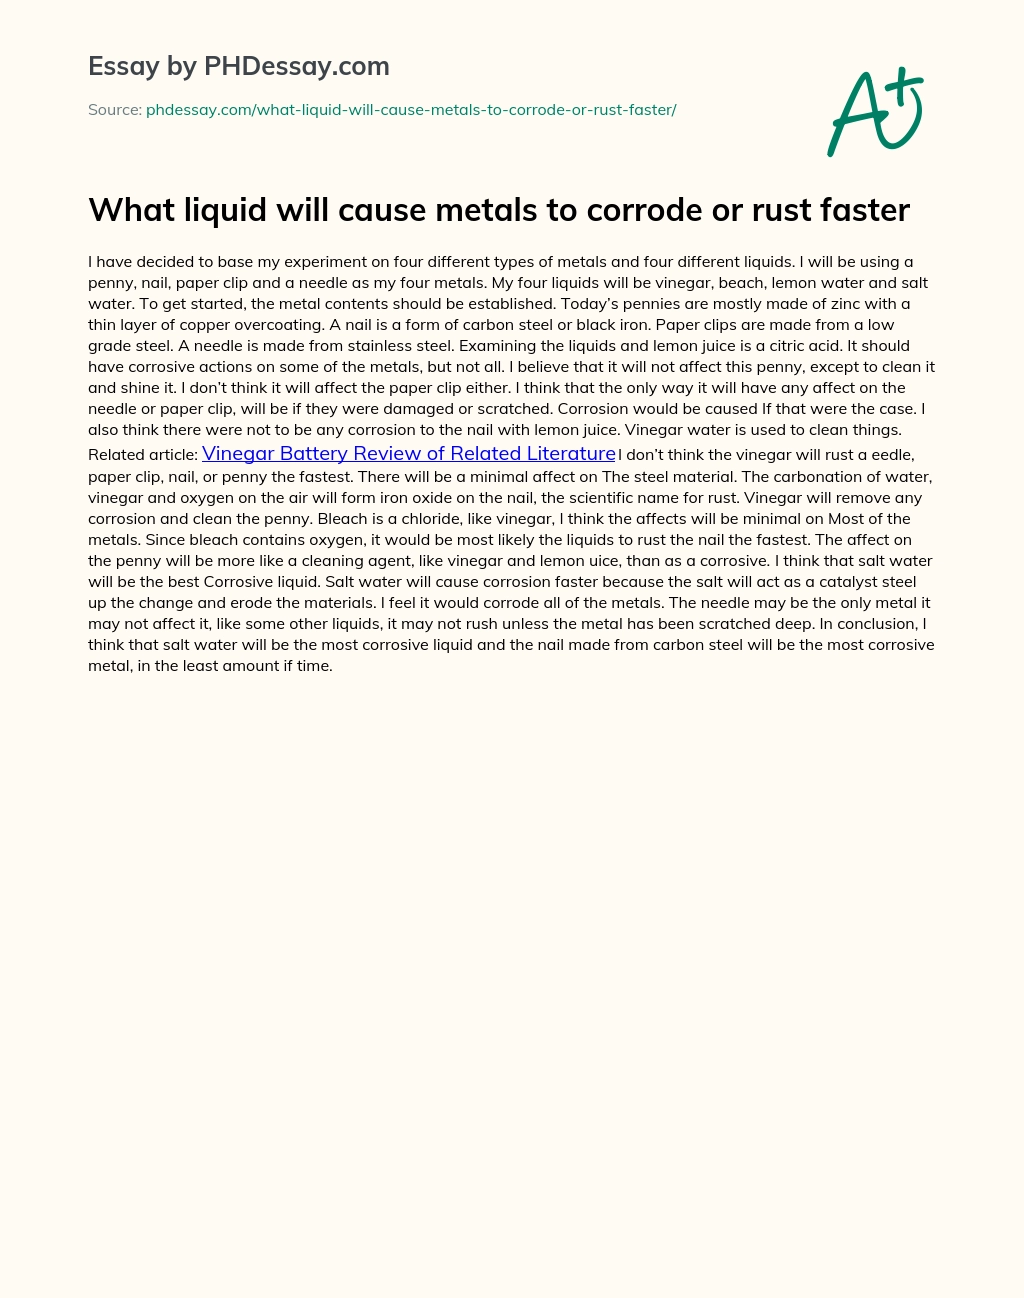 What liquid will cause metals to corrode or rust faster essay